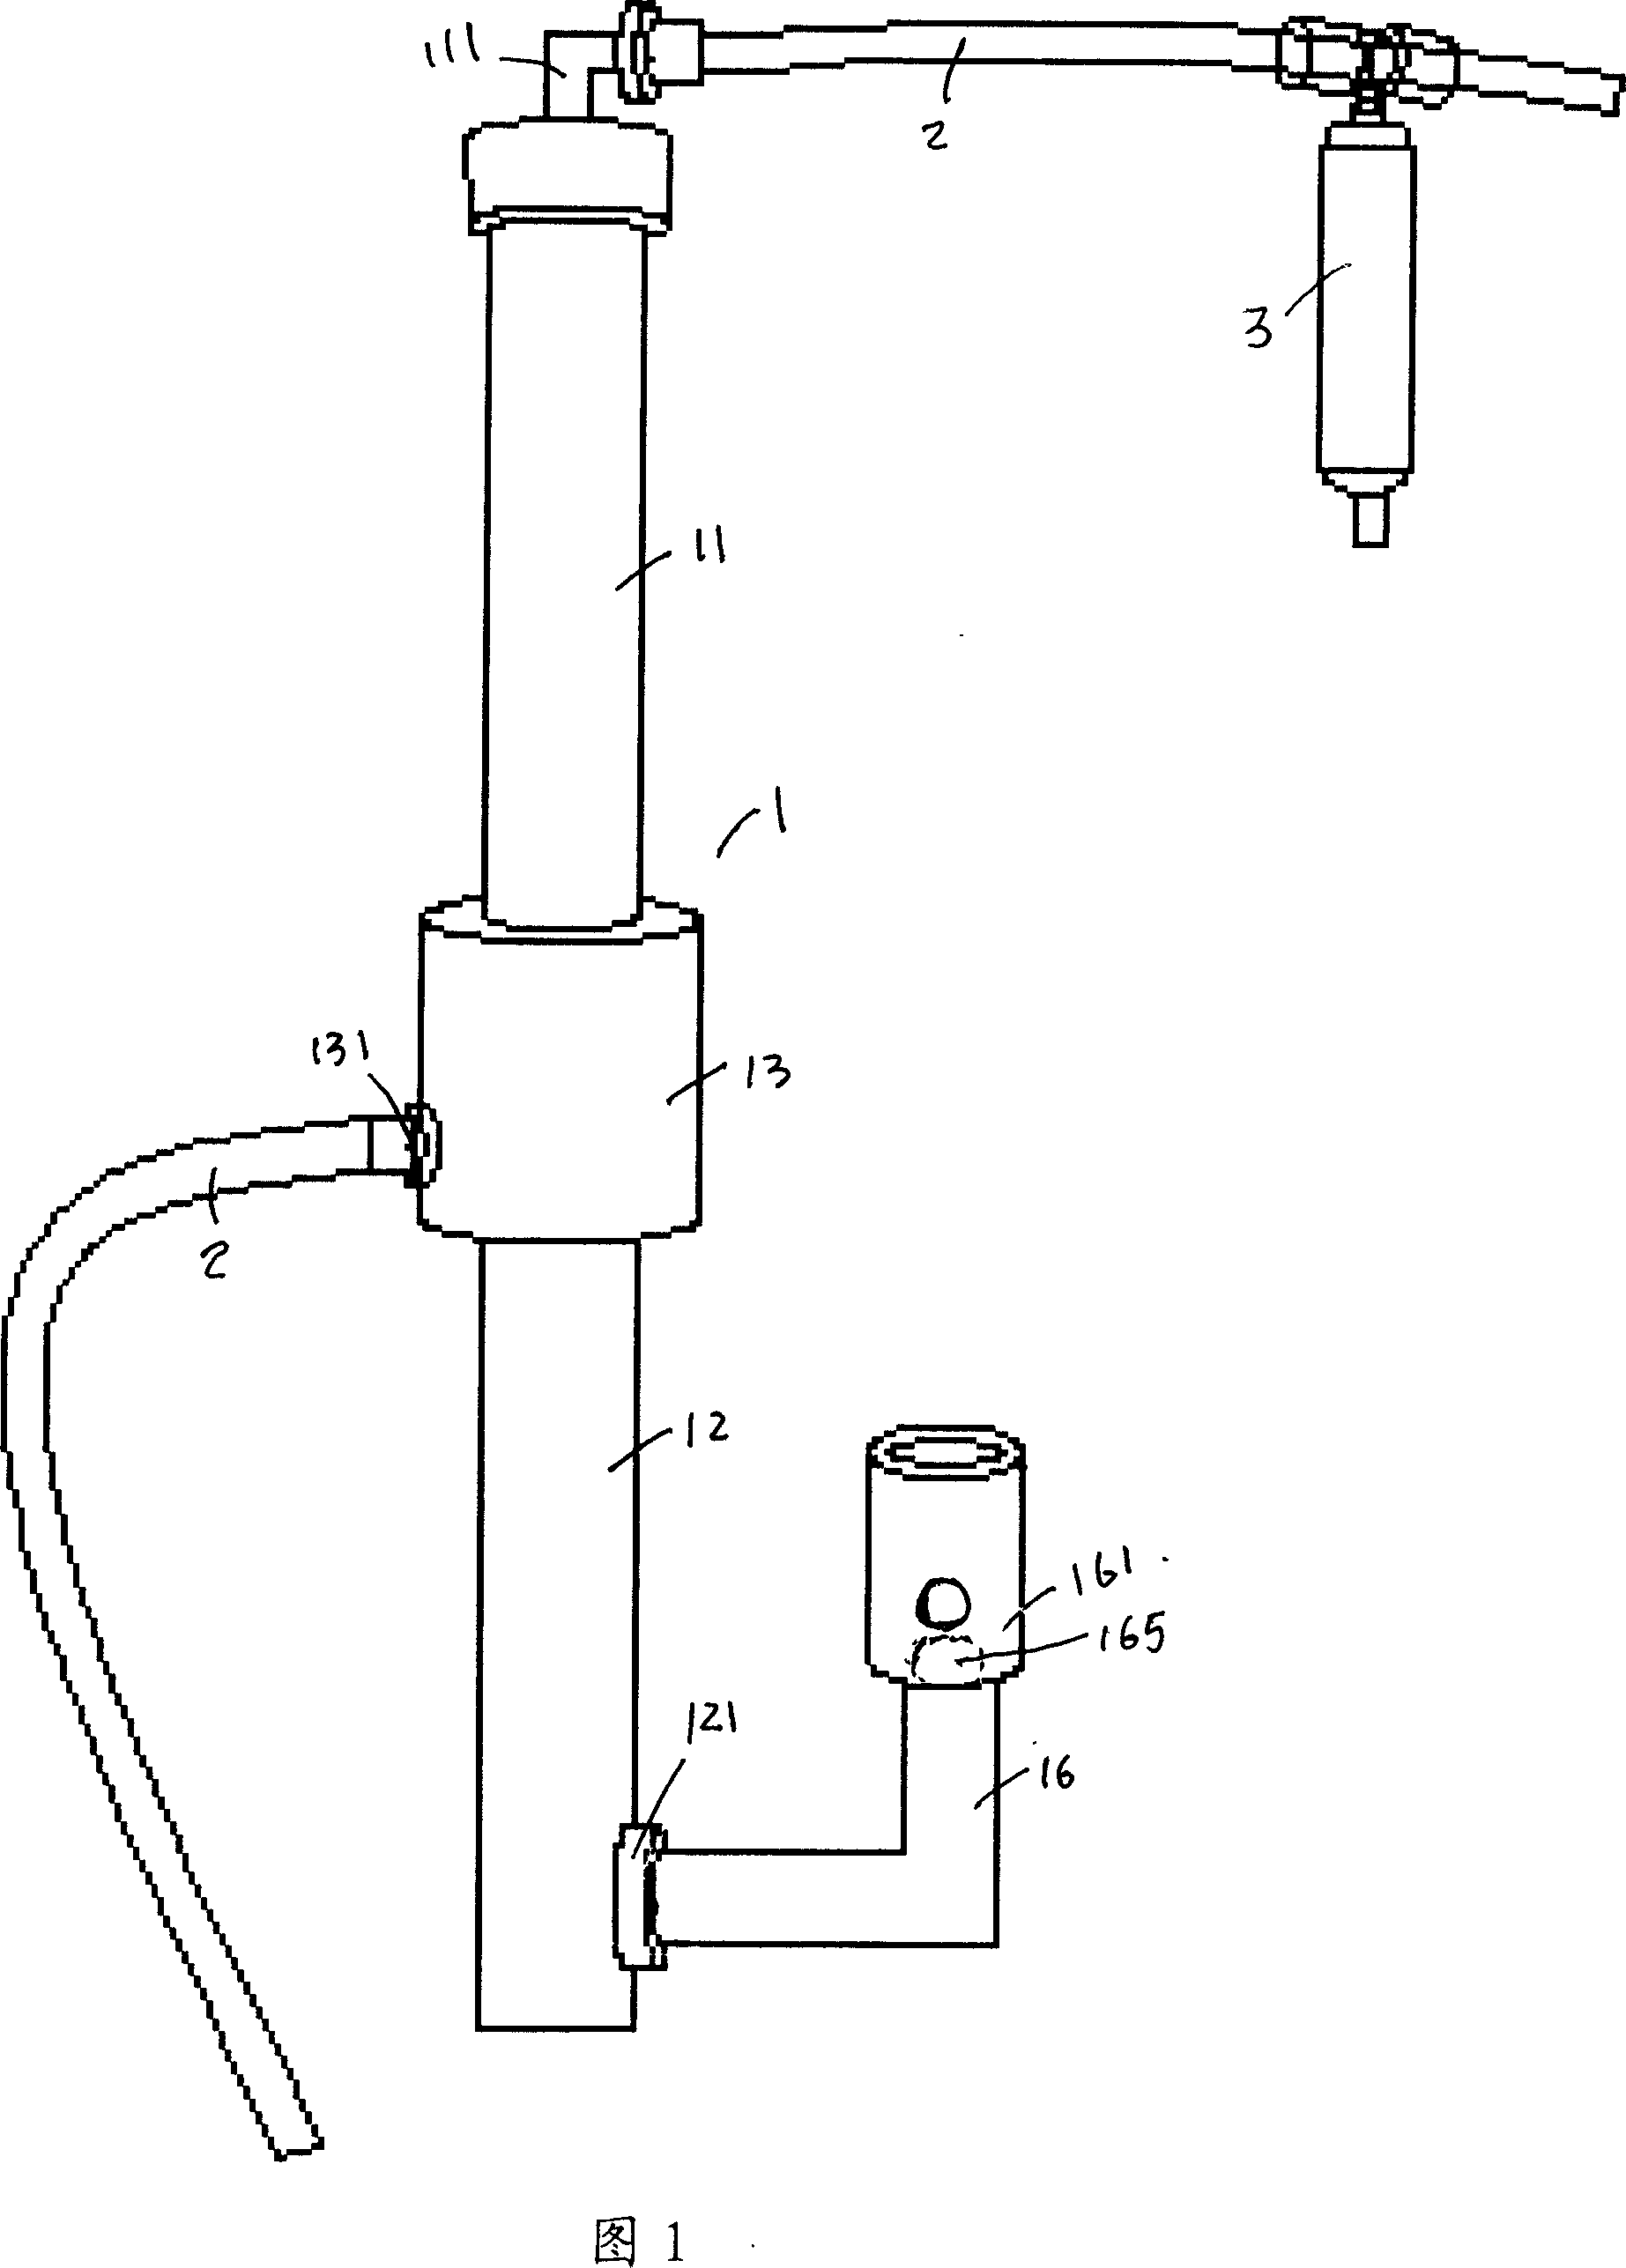 Gas pretreatment device for logging and its alarming controller